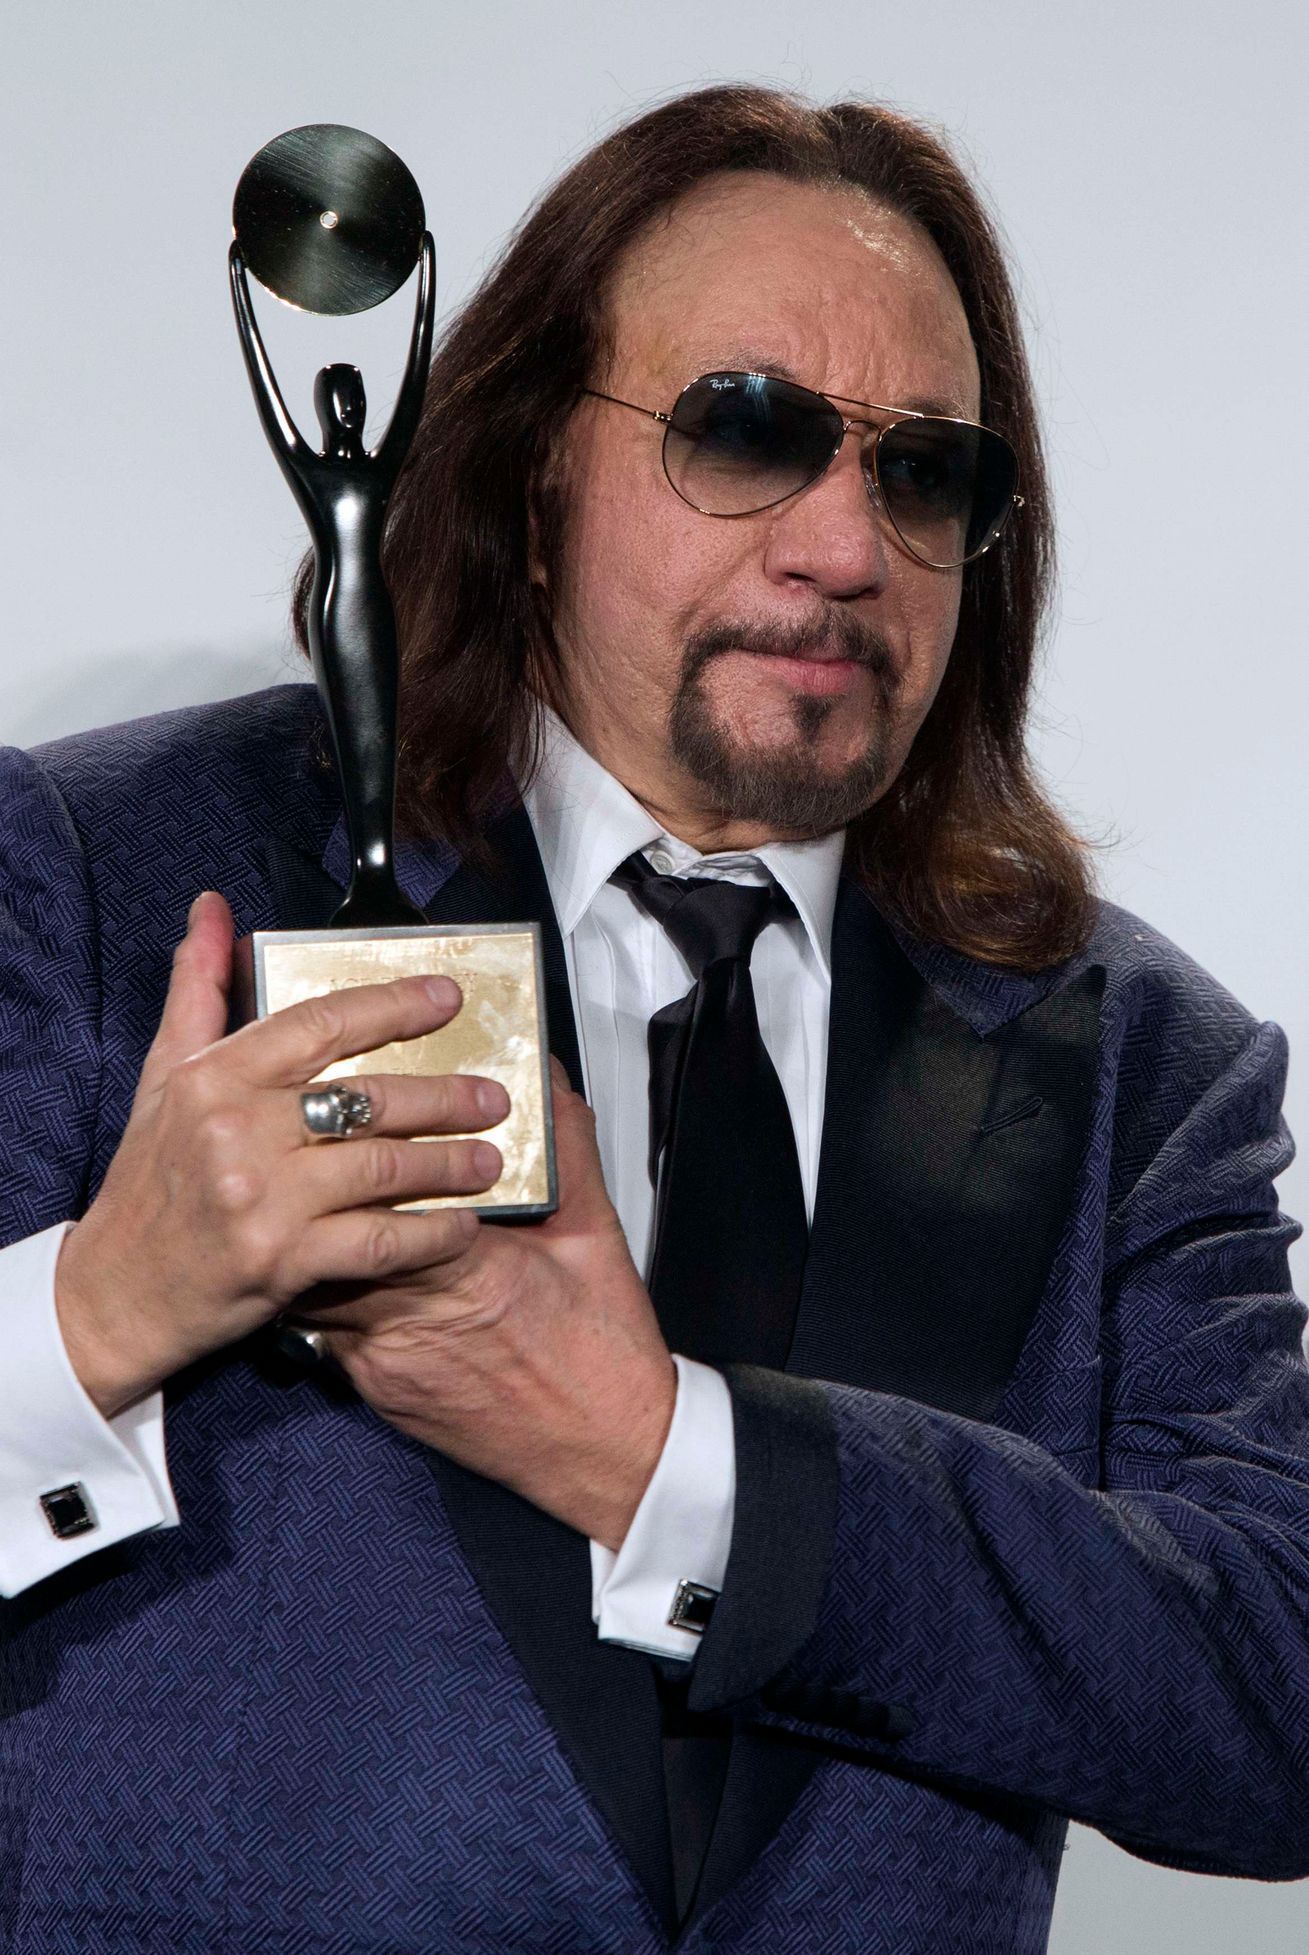 Kiss band member Frehley poses with his award after rock band was inducted at 29th annual Rock and Roll Hall of Fame Induction Ceremony in Brooklyn, New York